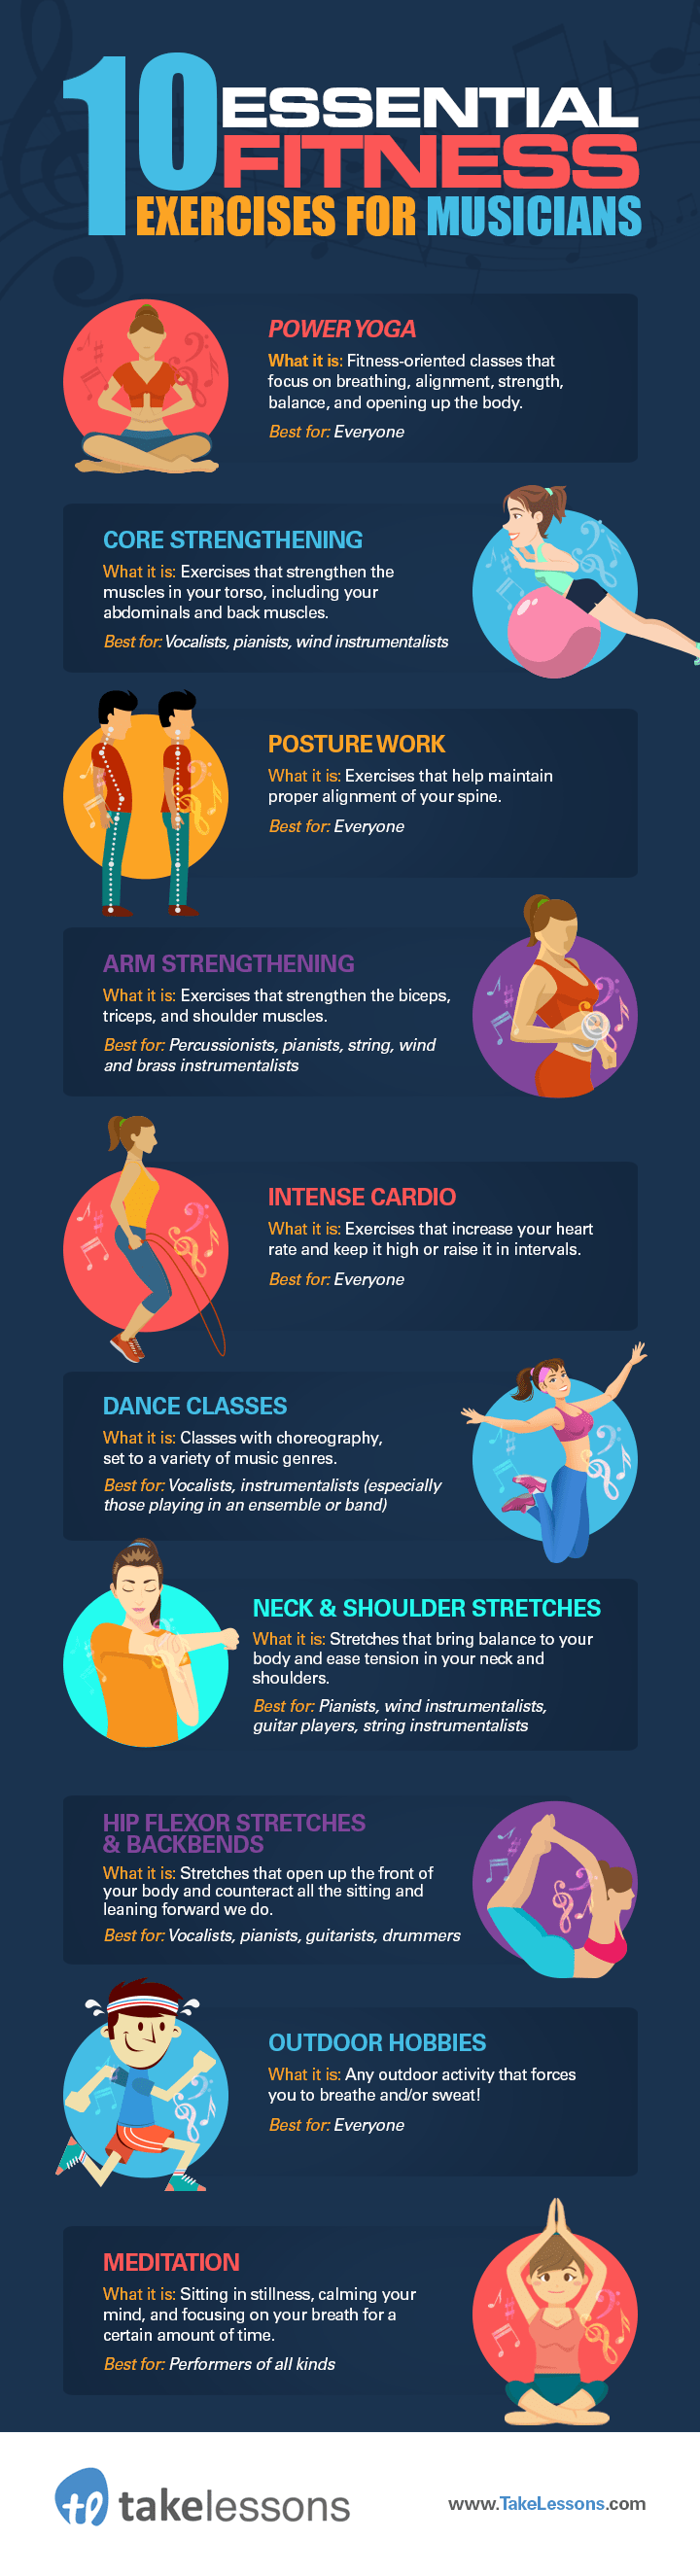 10-Essential-Fitness-Exercises-for-Musicians